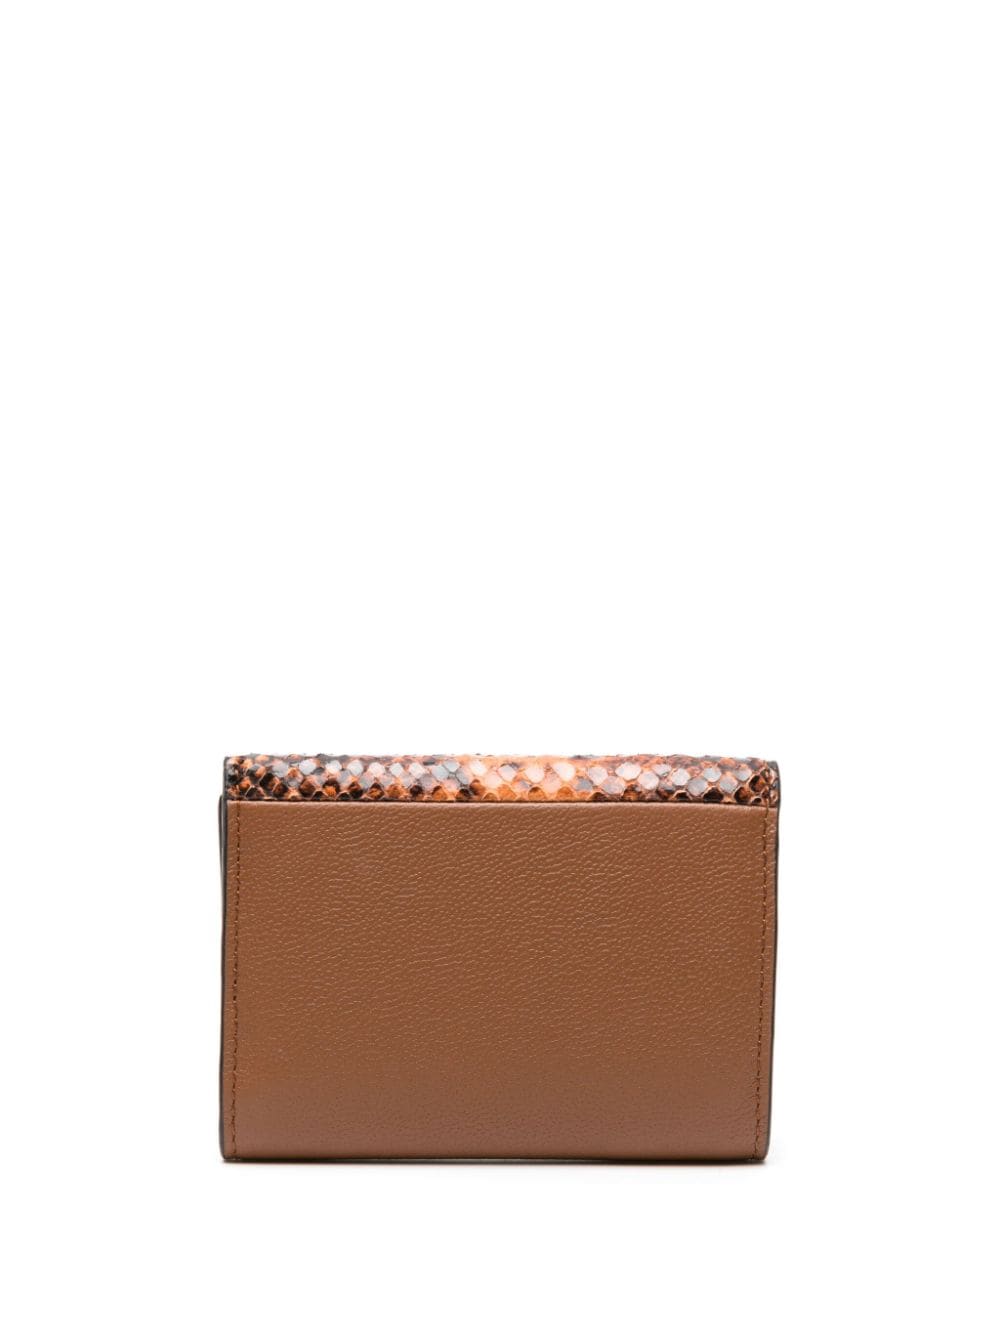 Image 2 of See by Chloé medium Layers tri-fold wallet